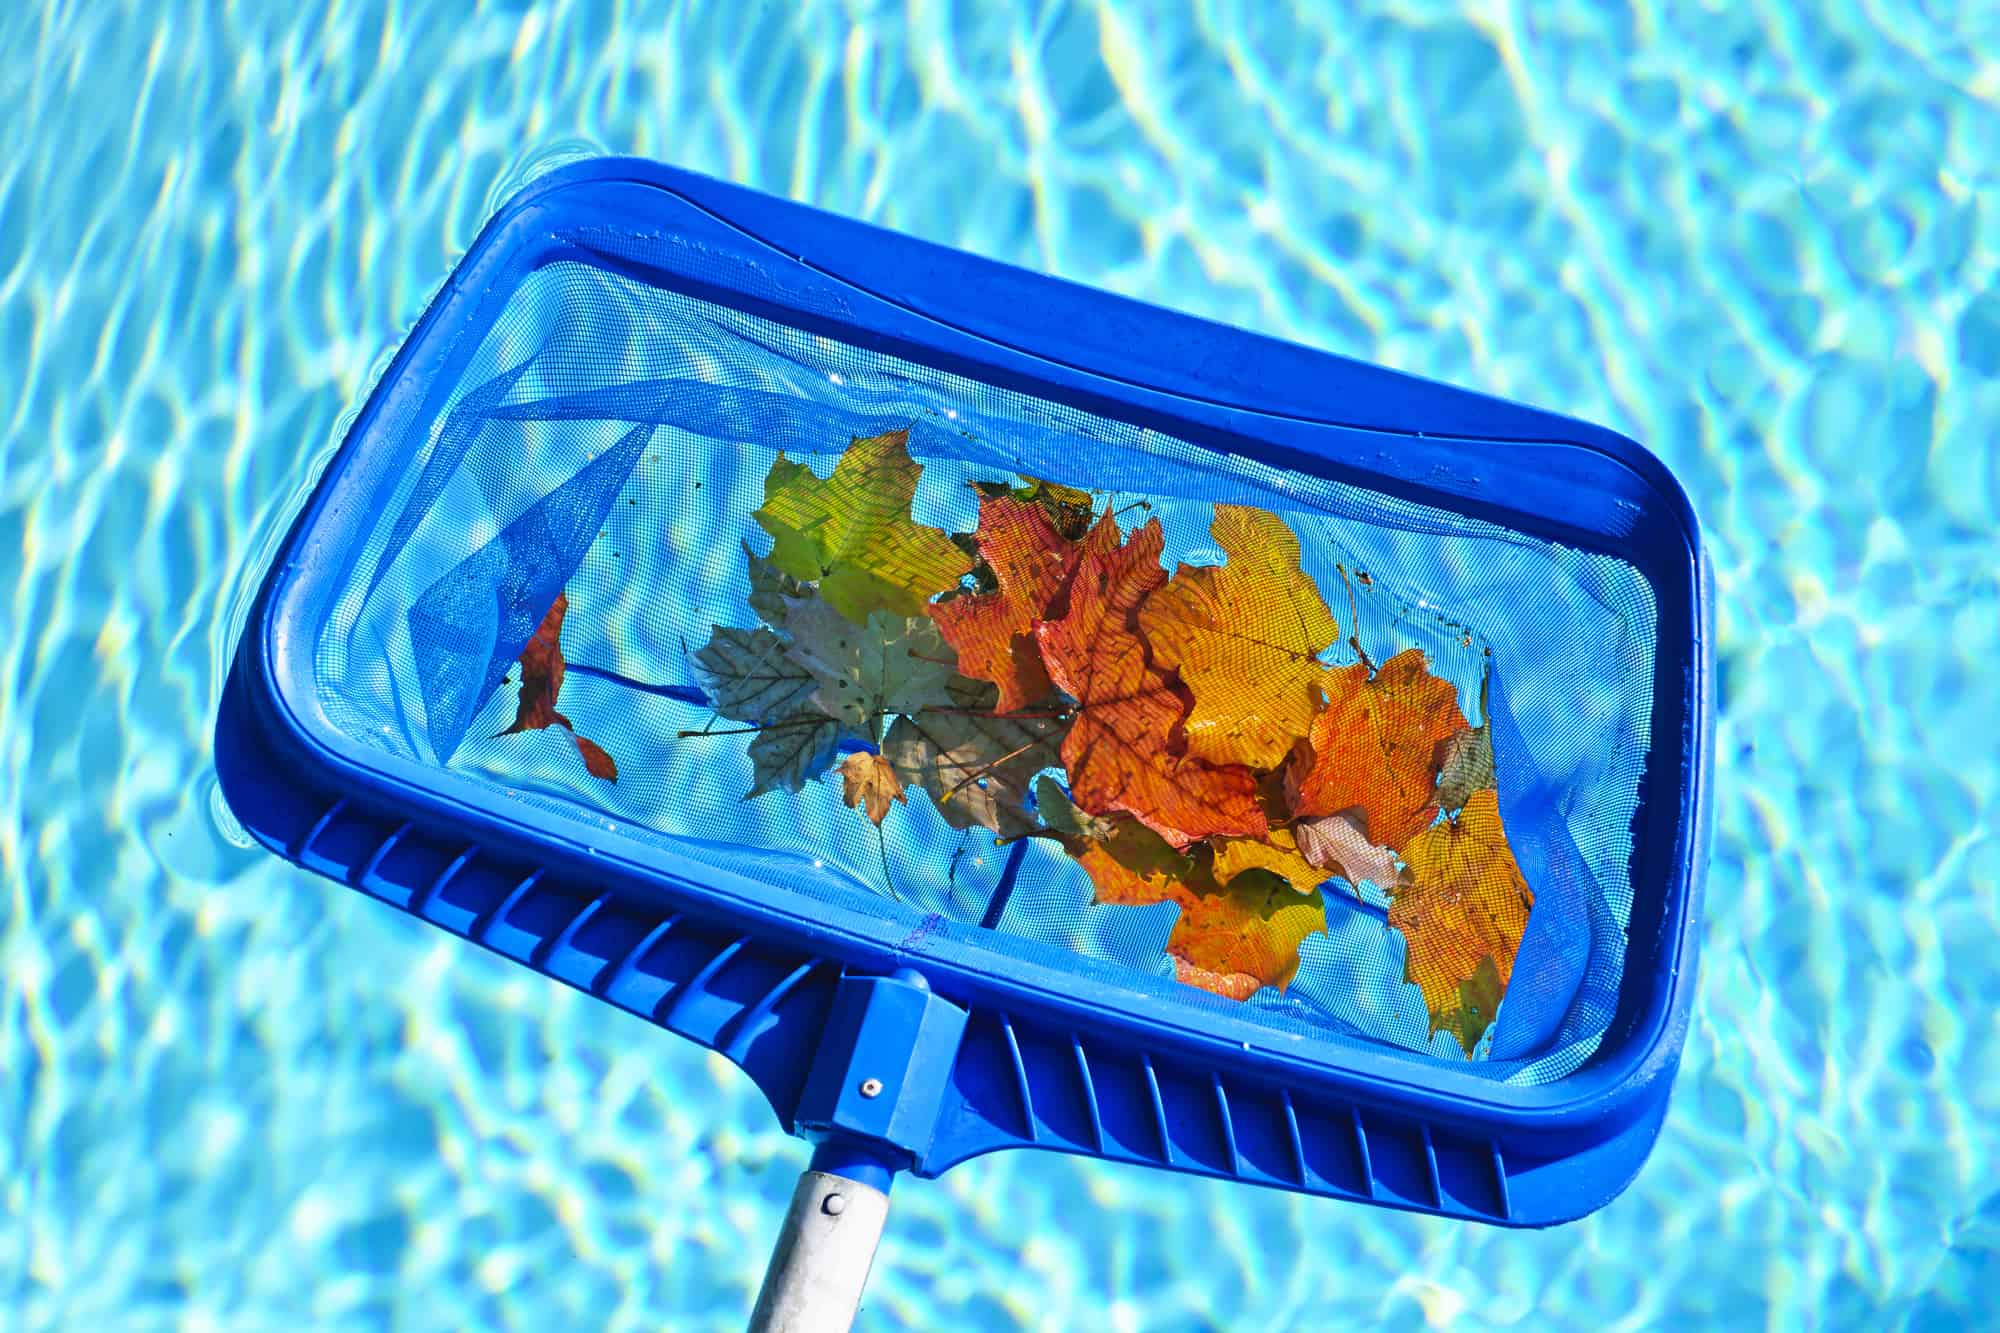 collecting leaves from kiddie pool